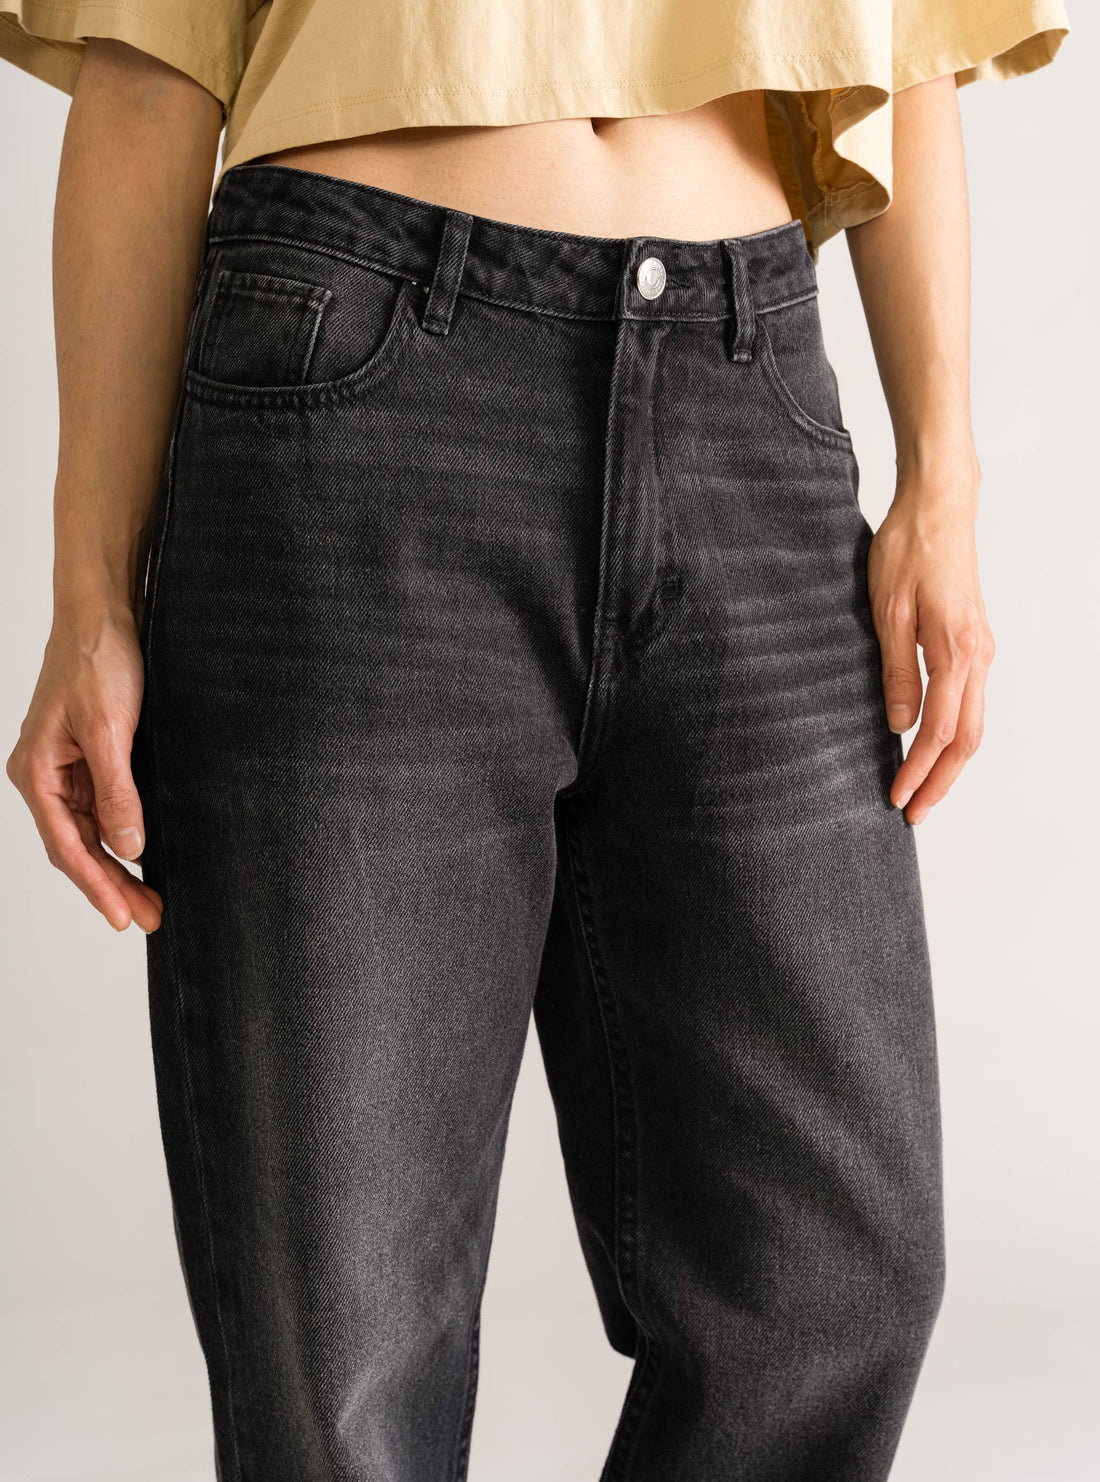 Paper Planes Baggy Jeans, Gris Obscuro